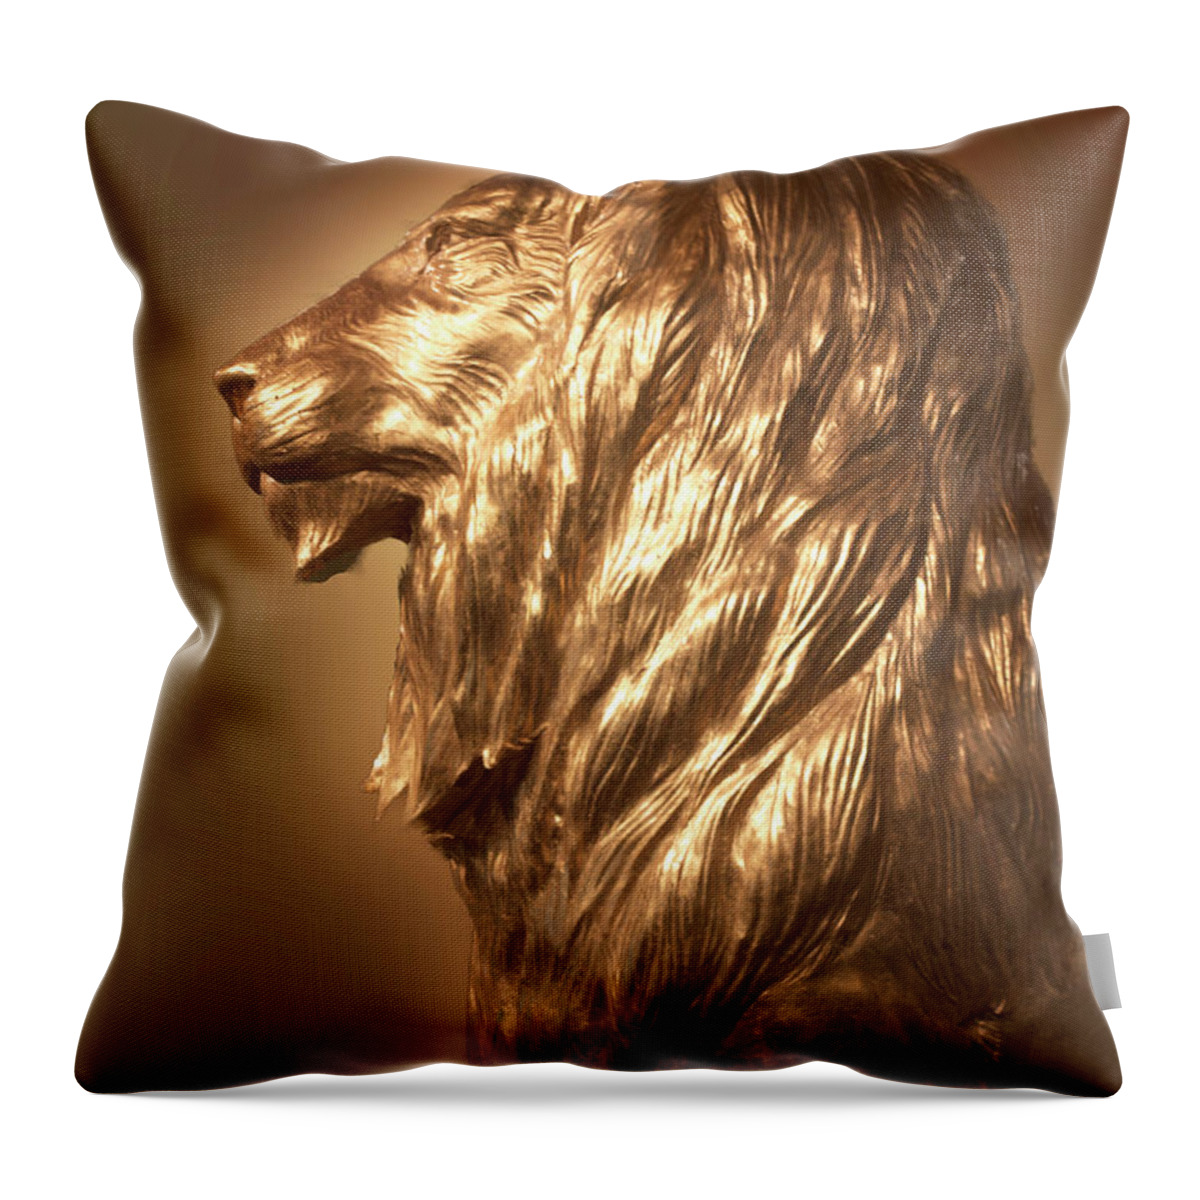 Animal Throw Pillow featuring the photograph MGM Lion Profile by Linda Phelps